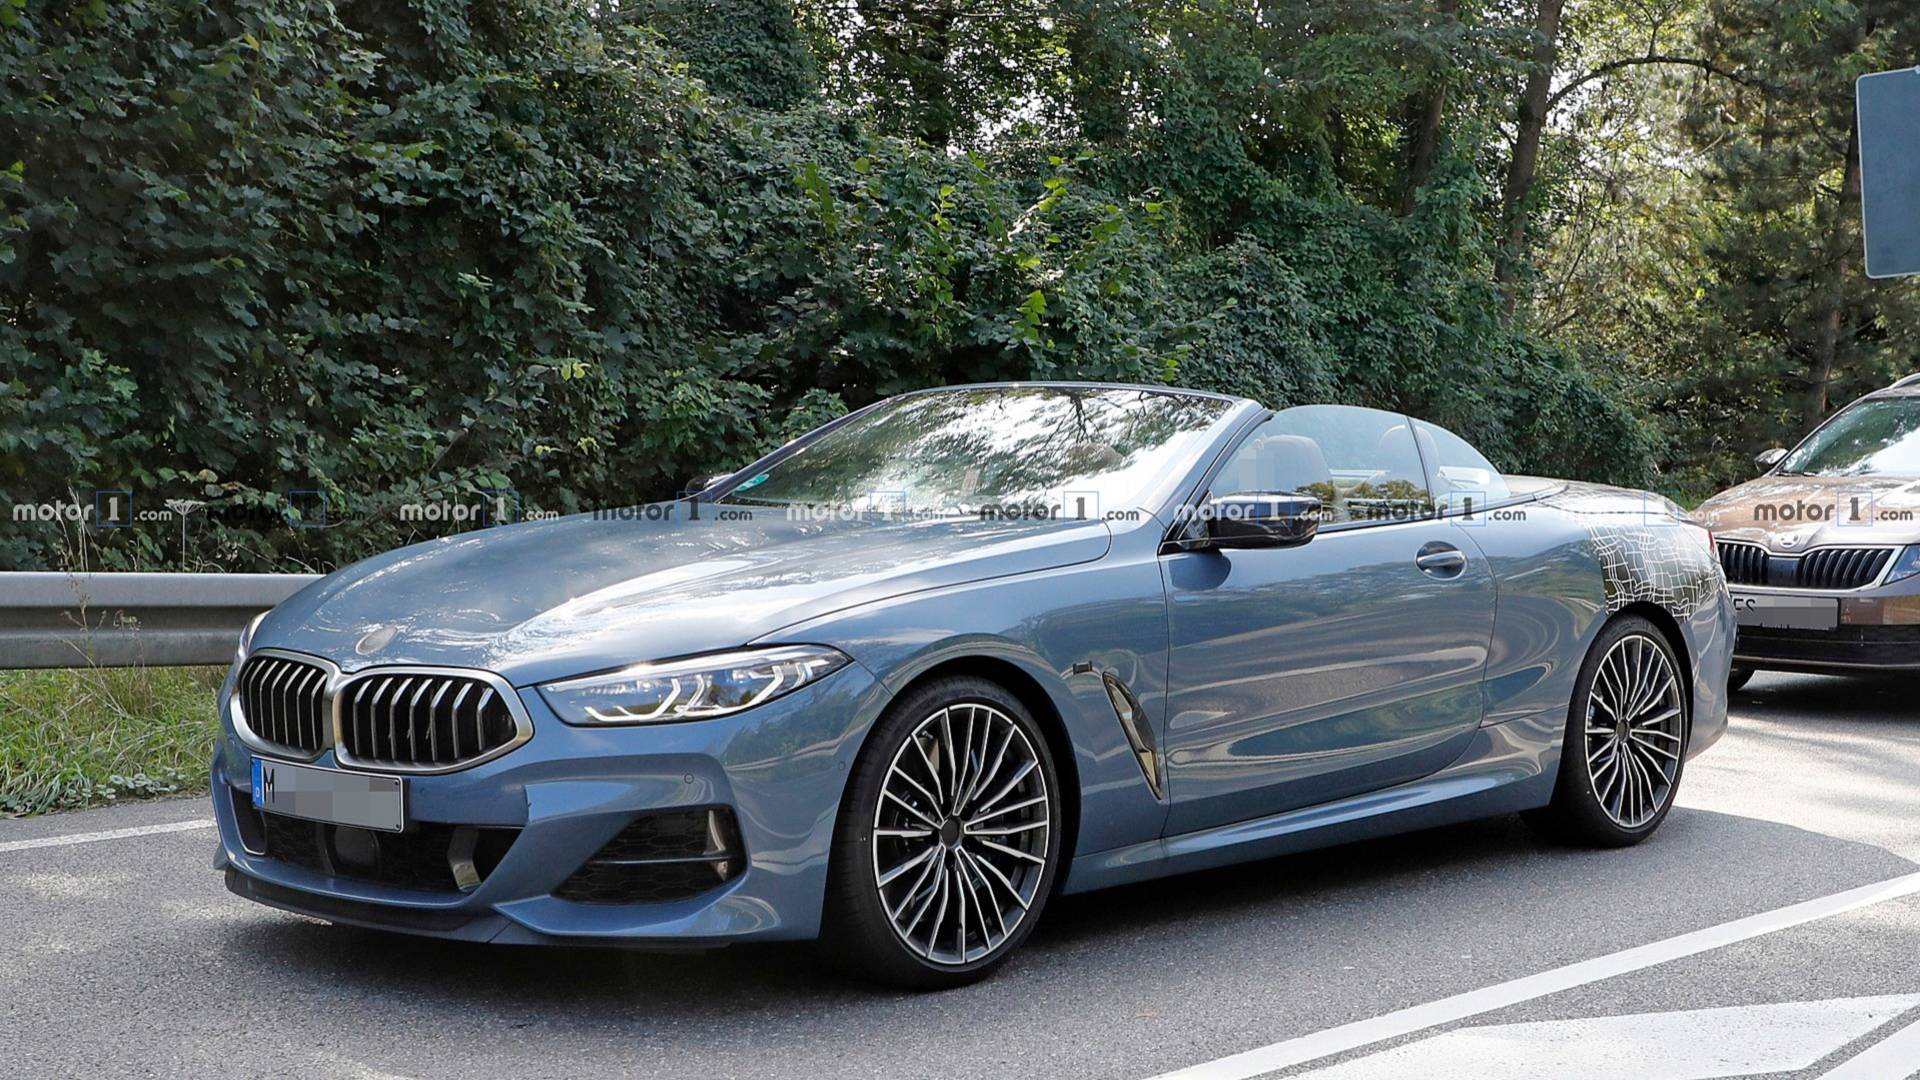 BMW 8 Series Convertible Nearly Naked In New Spy Photo